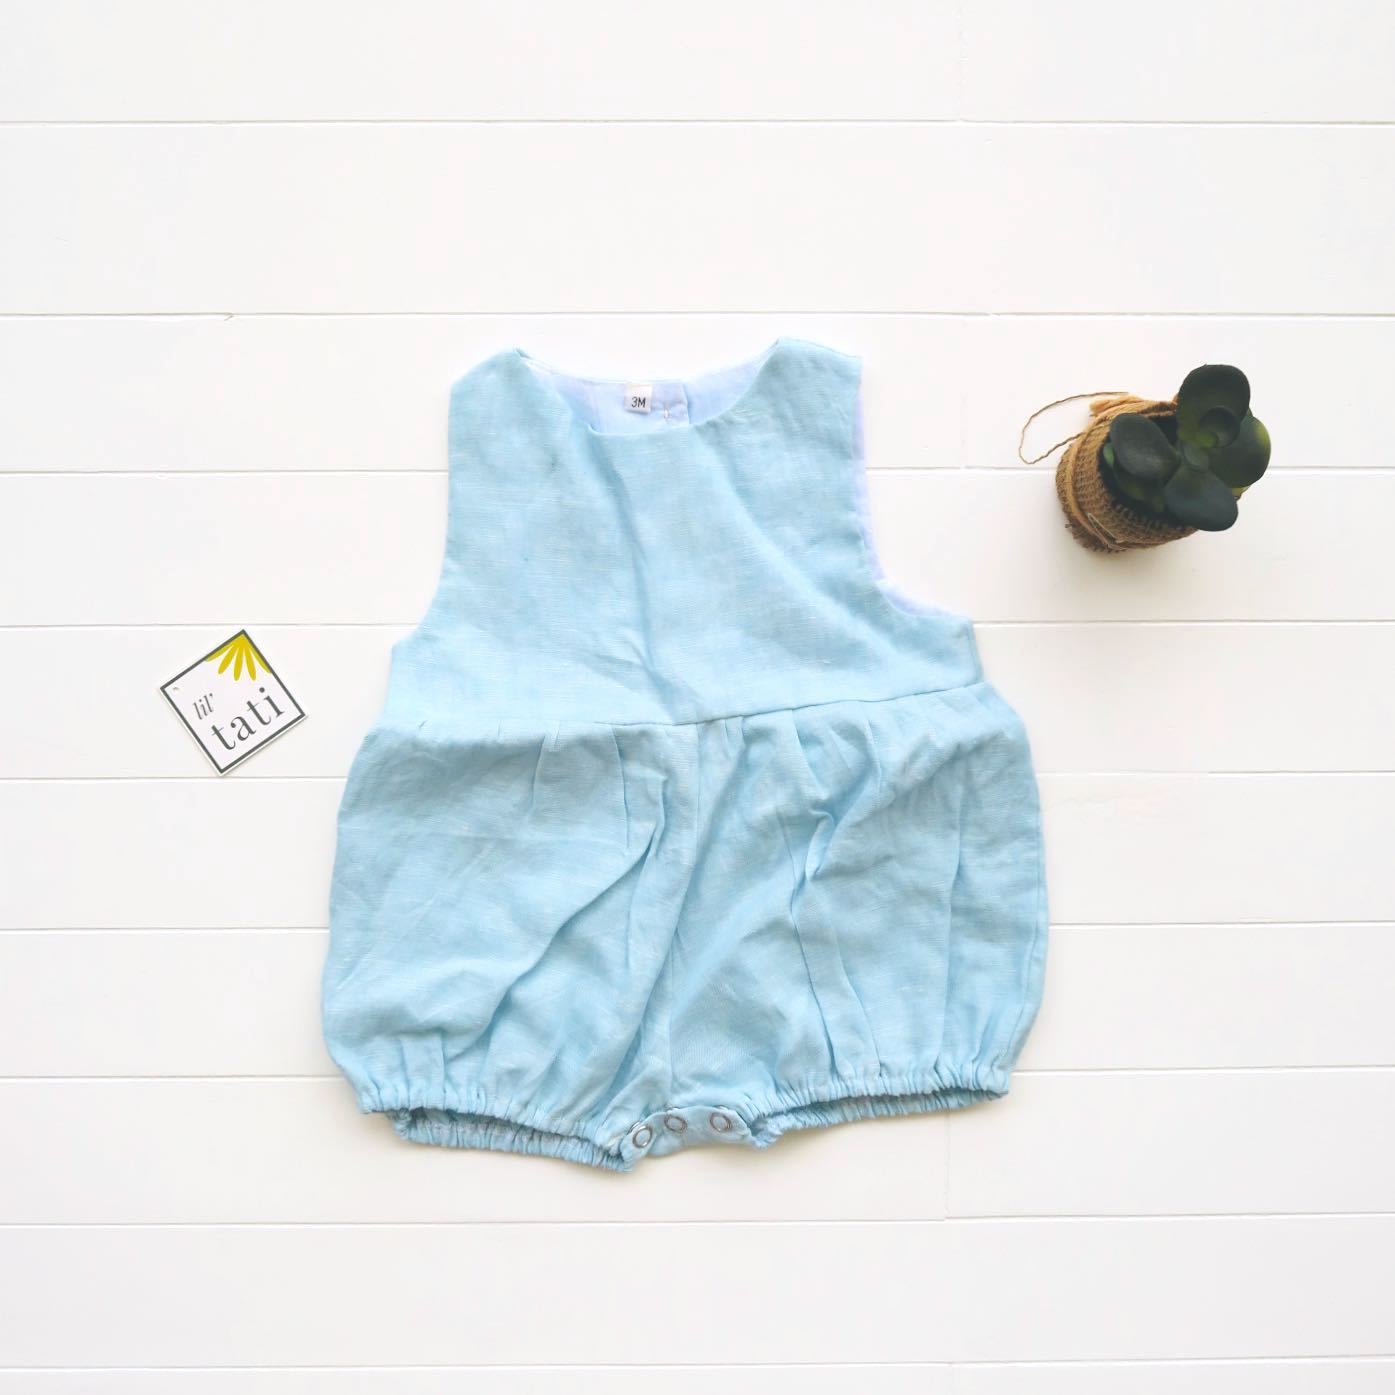 Orchid Playsuit in Linen Teal - Lil' Tati